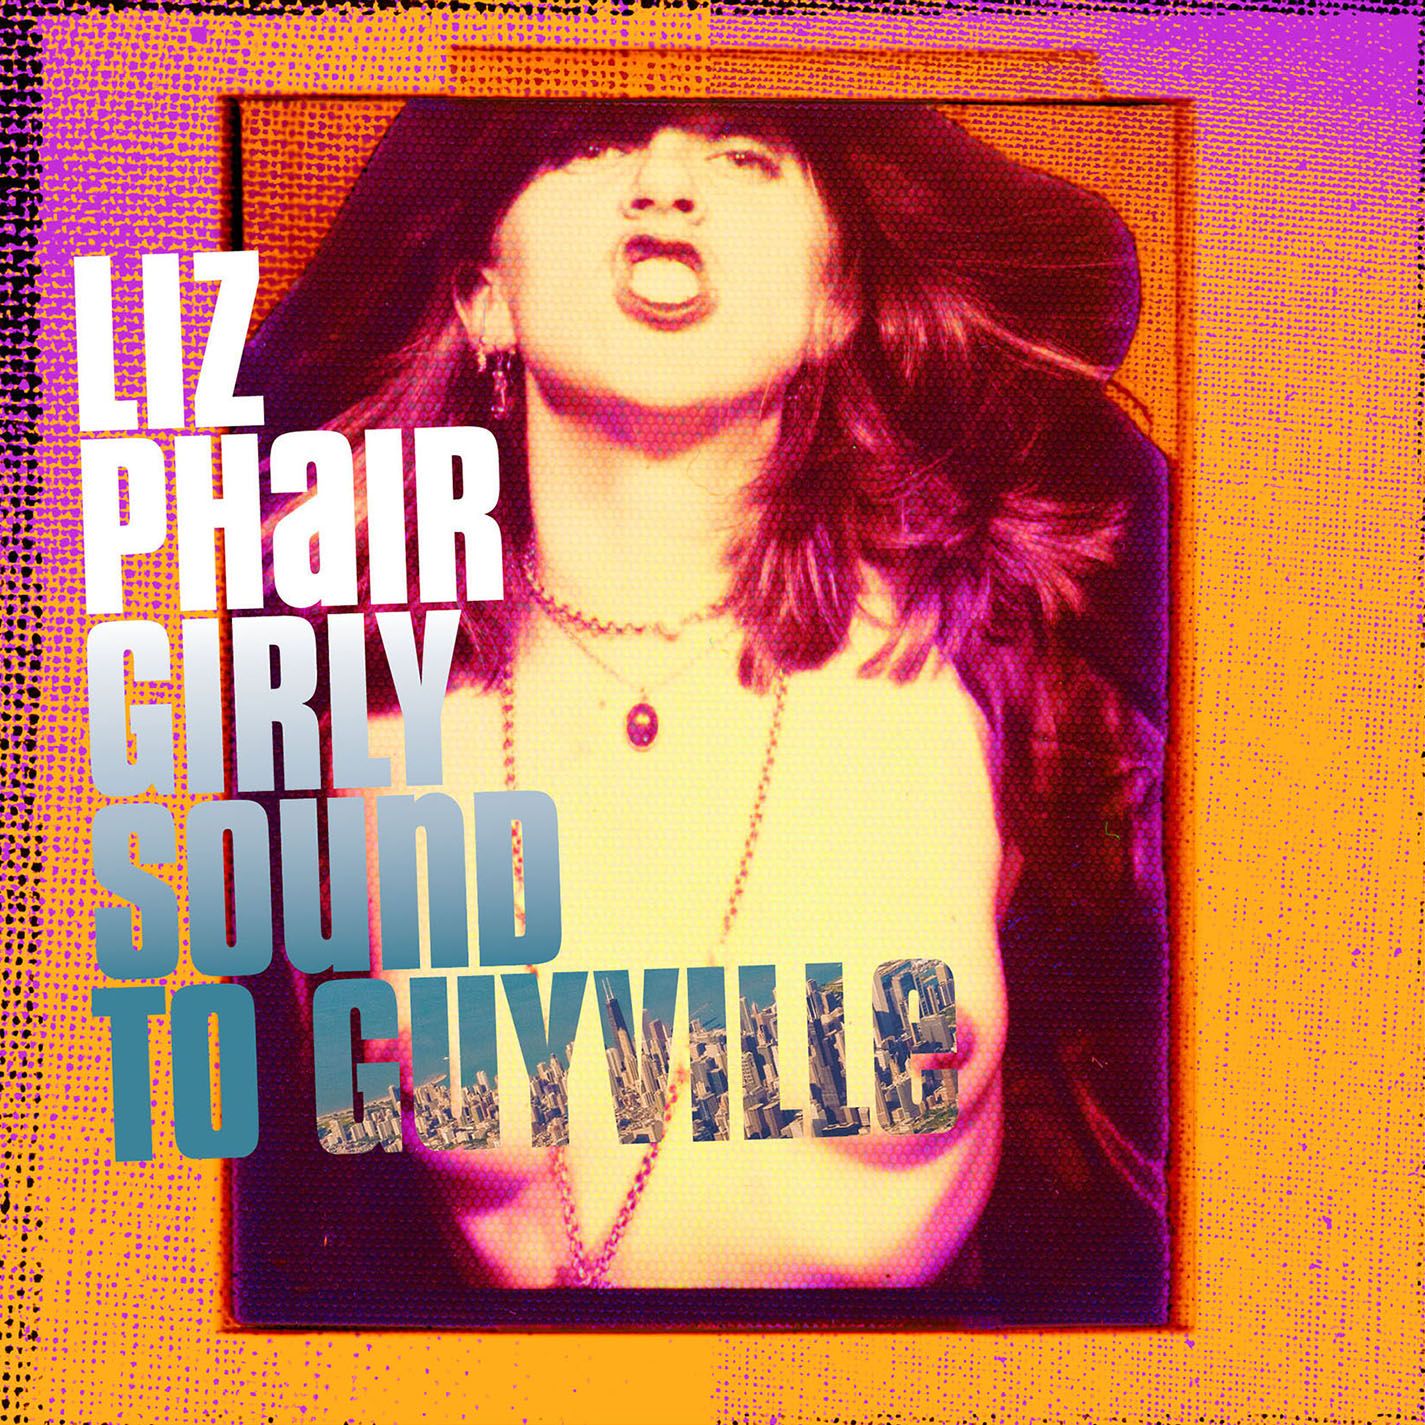 Girly - Sound To Guyville (25th Anniversary Deluxe